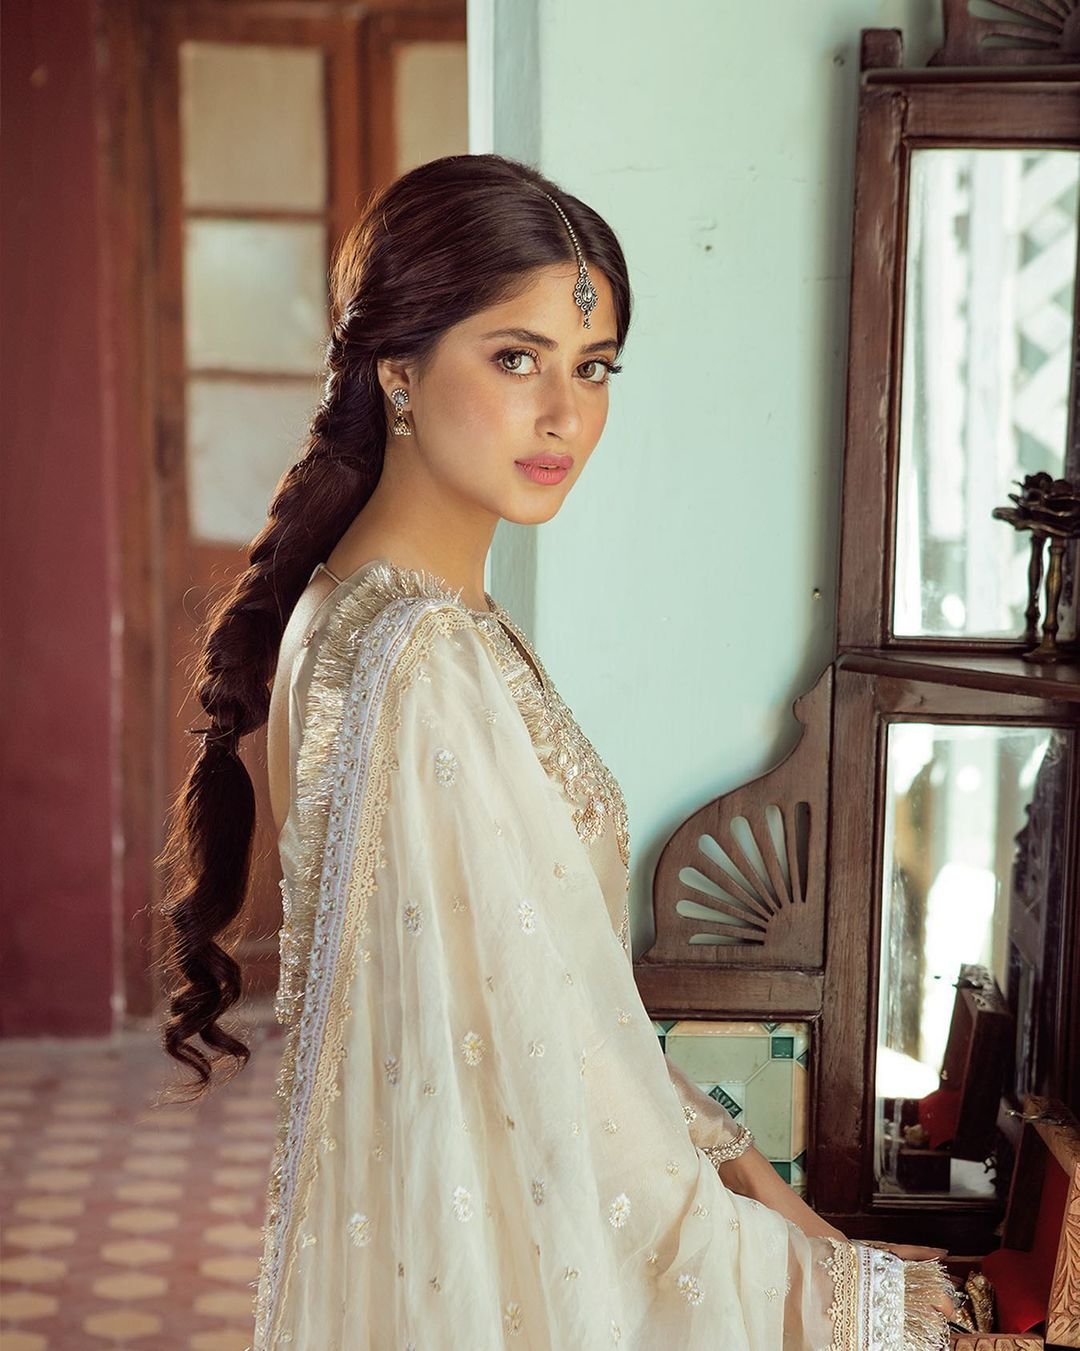 The classic Noval “Umrao Jan Ada” will have Sajal Aly in the top role